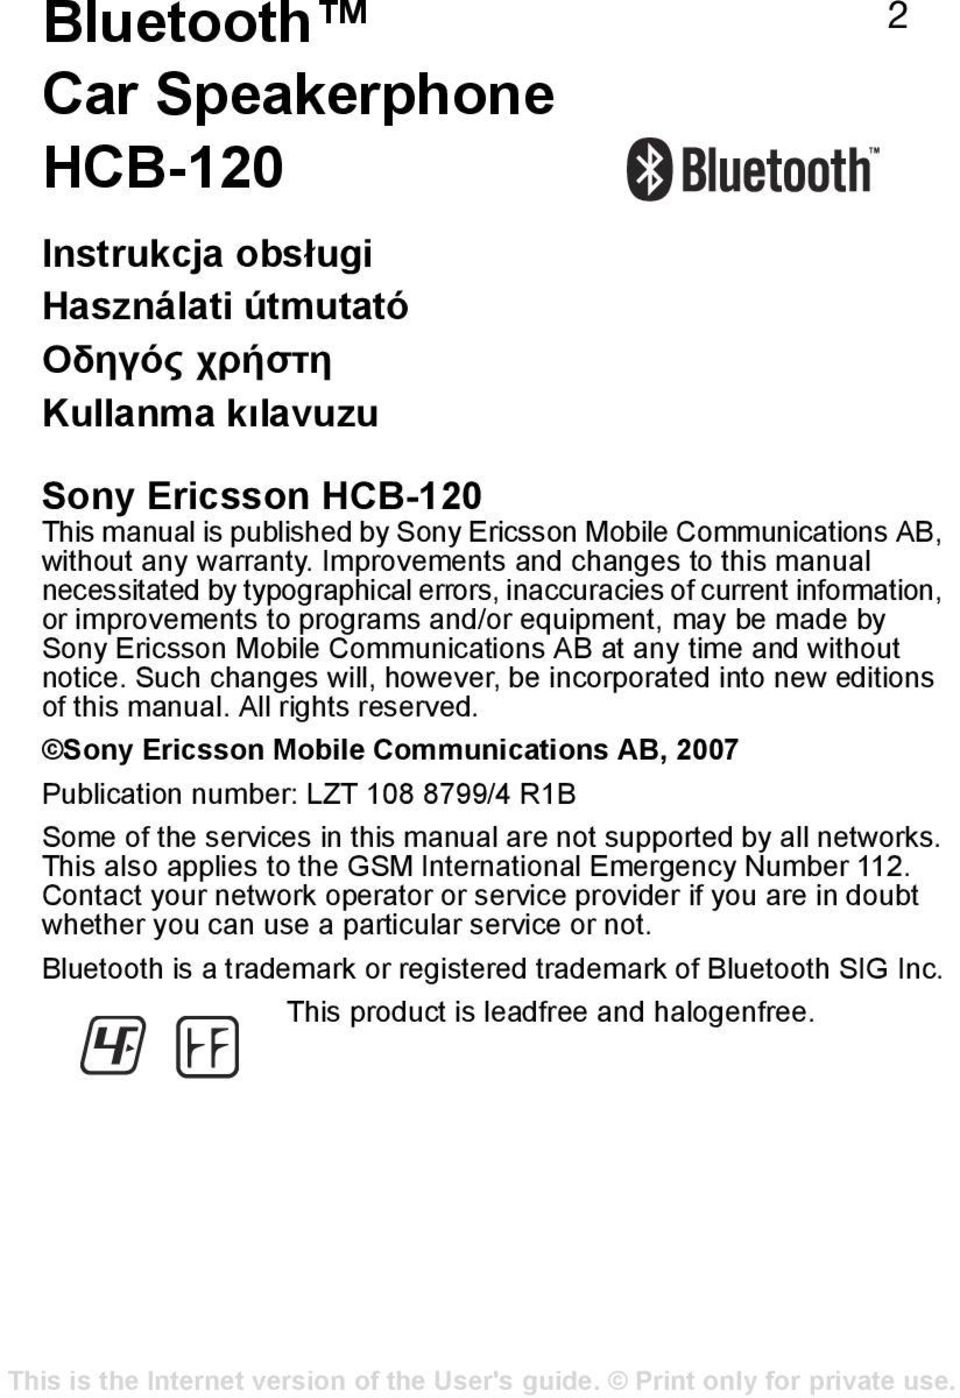 Improvements and changes to this manual necessitated by typographical errors, inaccuracies of current information, or improvements to programs and/or equipment, may be made by Sony Ericsson Mobile